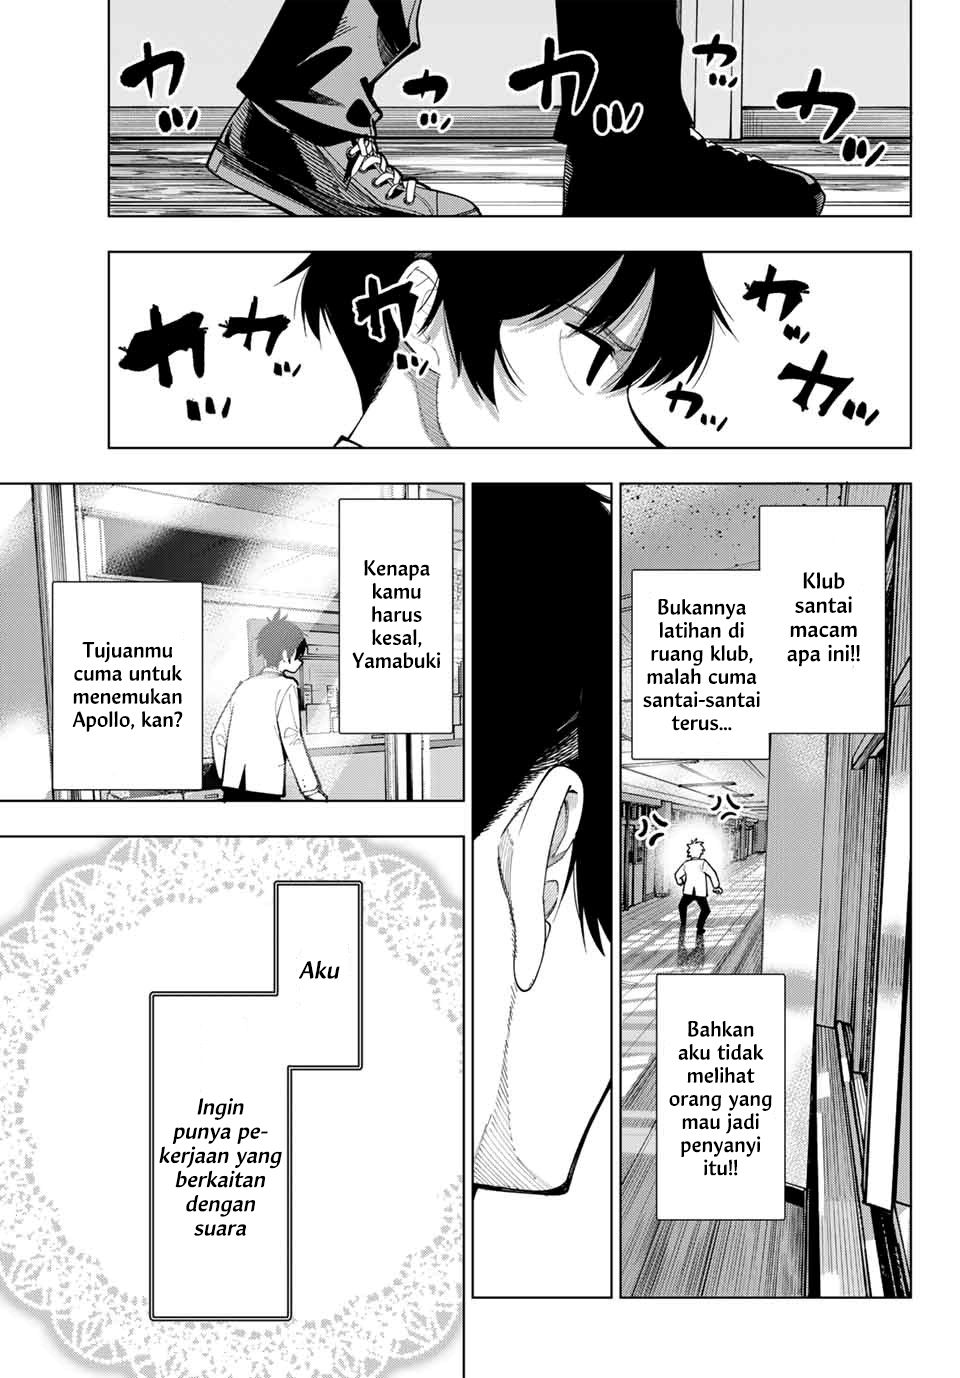 Mayonaka Heart Tune (Tune In to the Midnight Heart) Chapter 02 Image 30